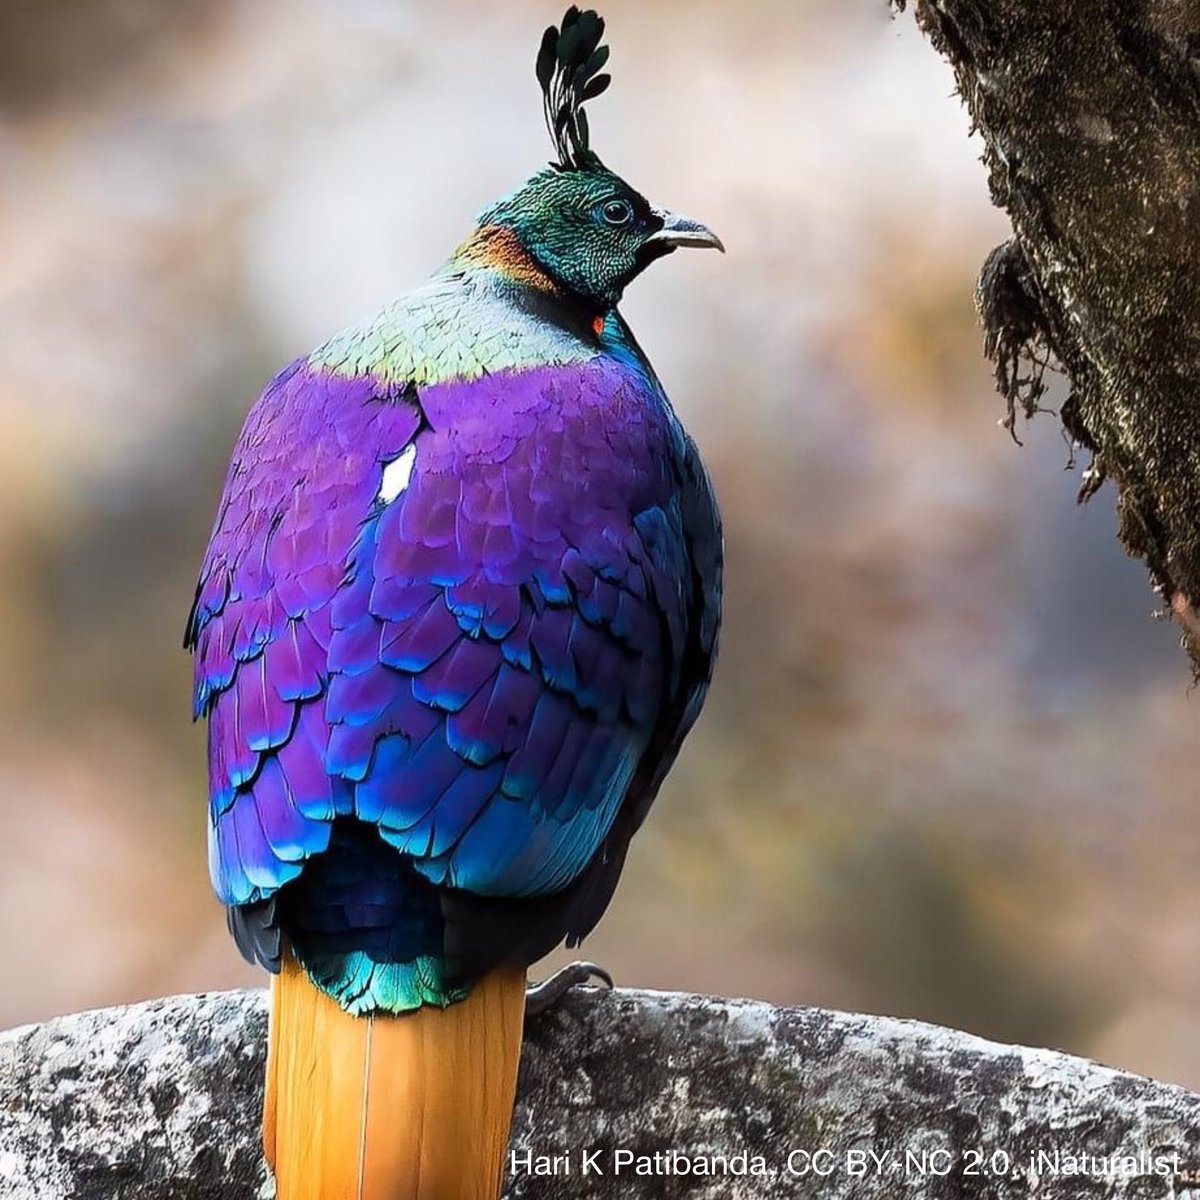 Behold the vibrant Himalayan Monal! 🌈 Males flaunt iridescent feathers to attract mates. Found in the Himalayas, this bird lives at altitudes up to 16,000 ft (4,877 m) in summer! It uses its hooked beak to forage for insects, seeds, and berries.